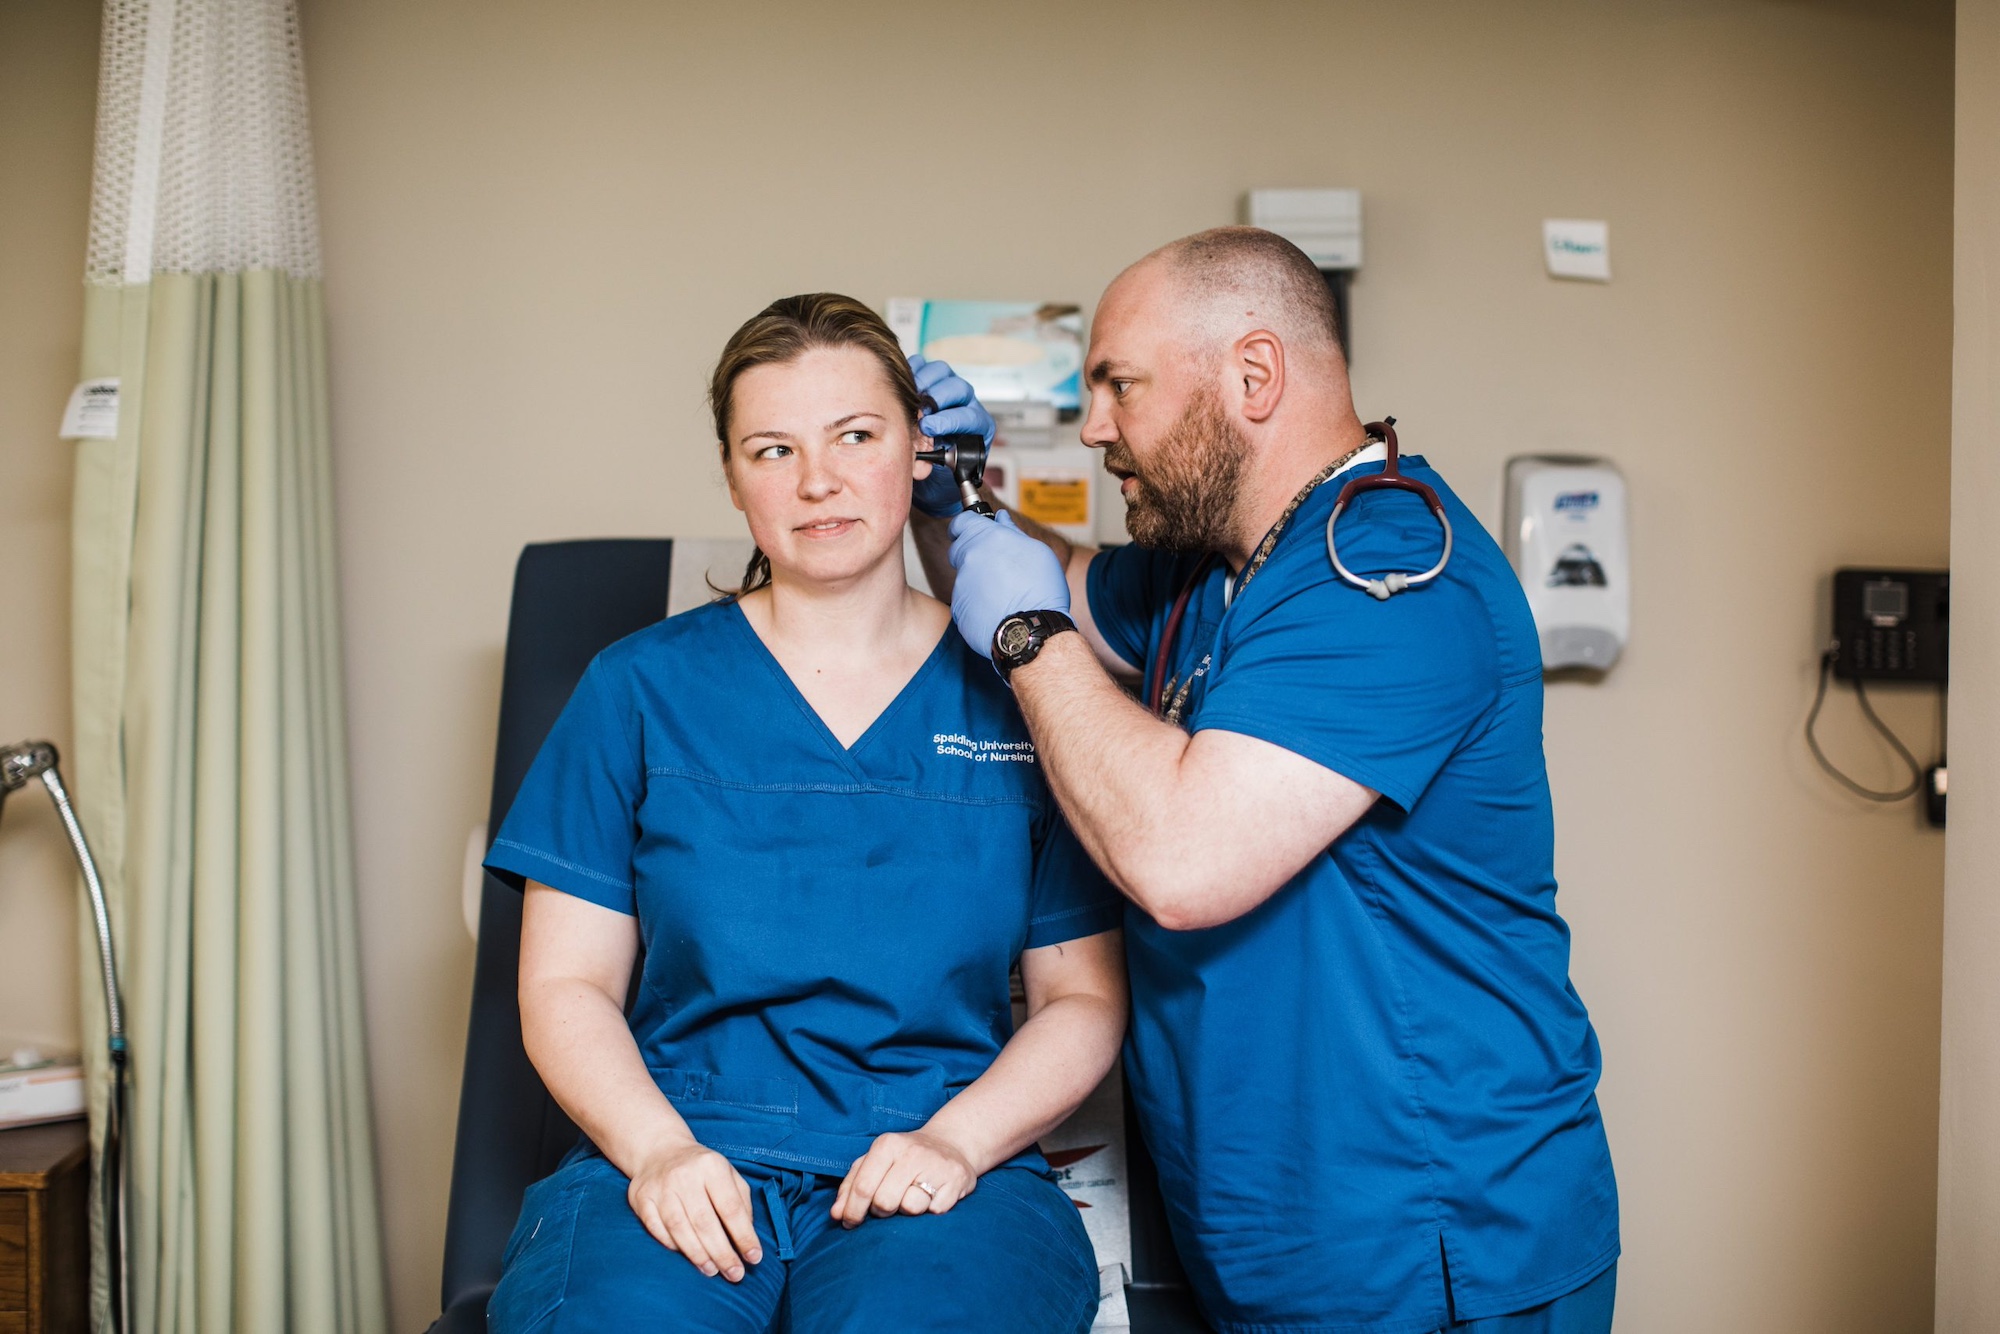 Two Spalding University nursing students in blue scrubs practicing an ear exam